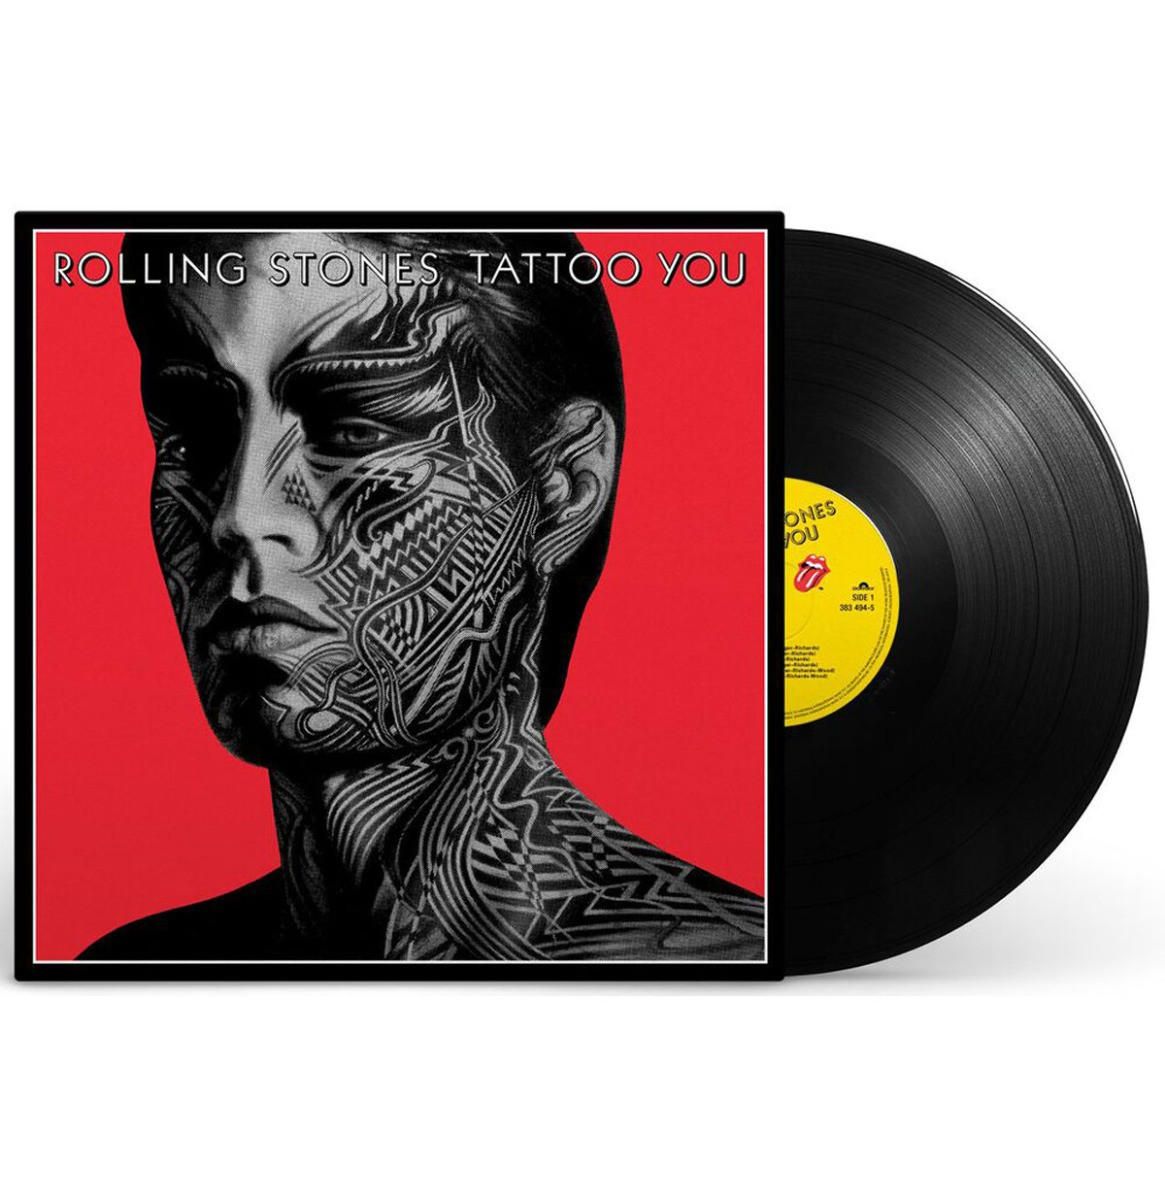 The Rolling Stones - Tattoo You (40th Anniversary Edition Re-issue) LP